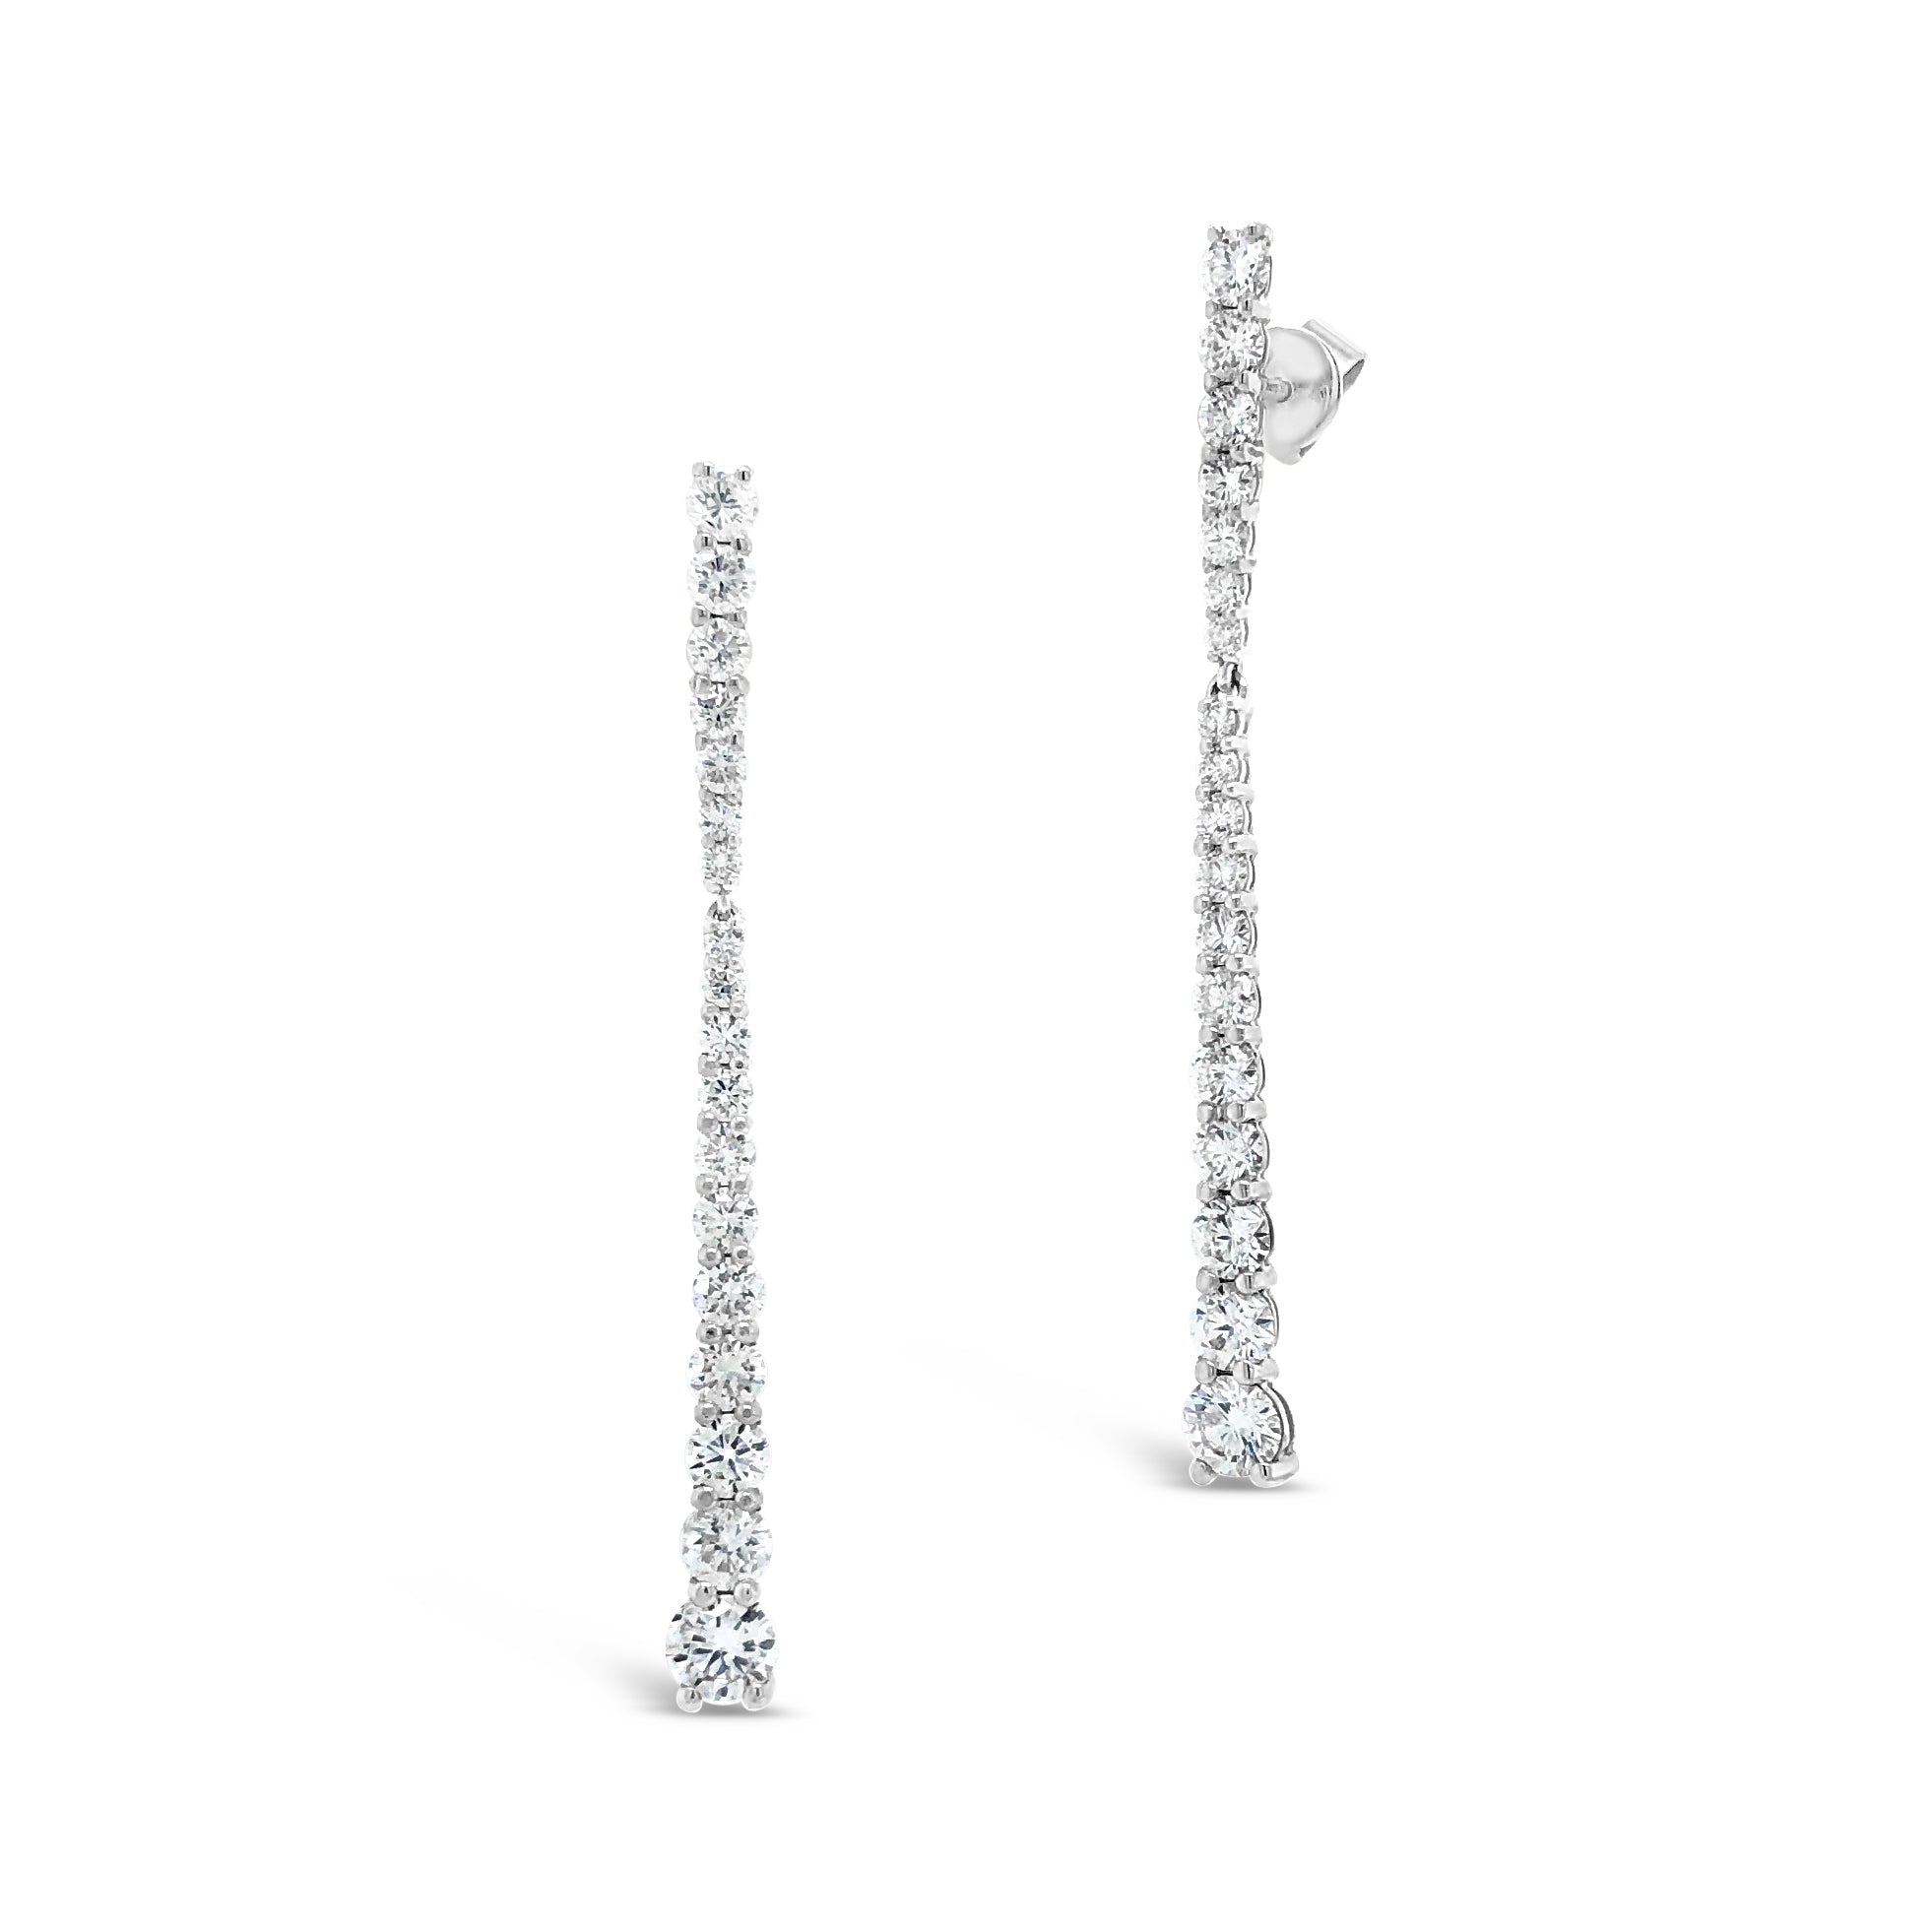 Shared Prong-Set Diamond Dangle Earrings -14K white gold weighing 2.6 grams -36 round diamonds totaling 2.01 carats